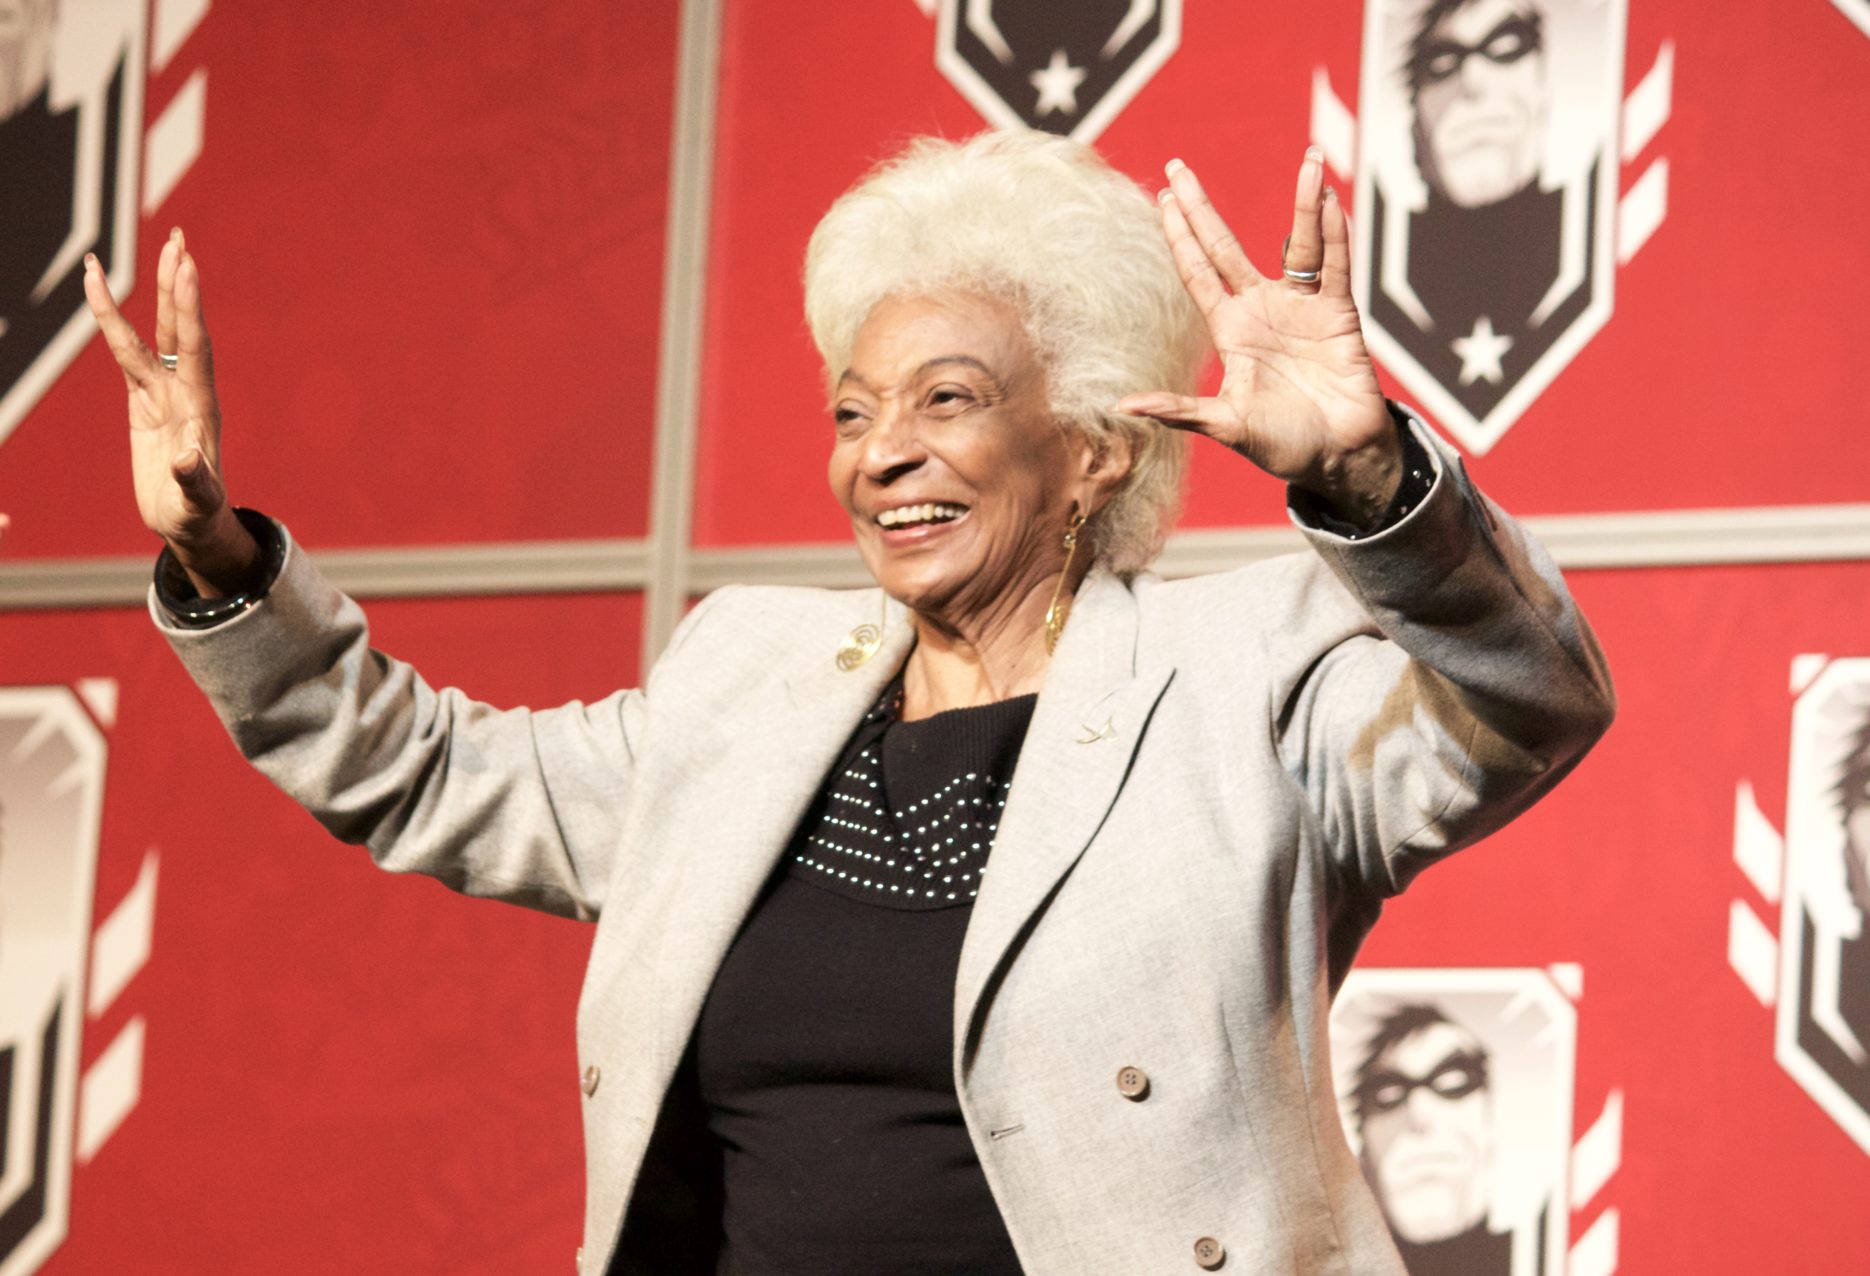 Nichelle Nichols giving the Vulcan salute with both hands on stage at a 2016 con